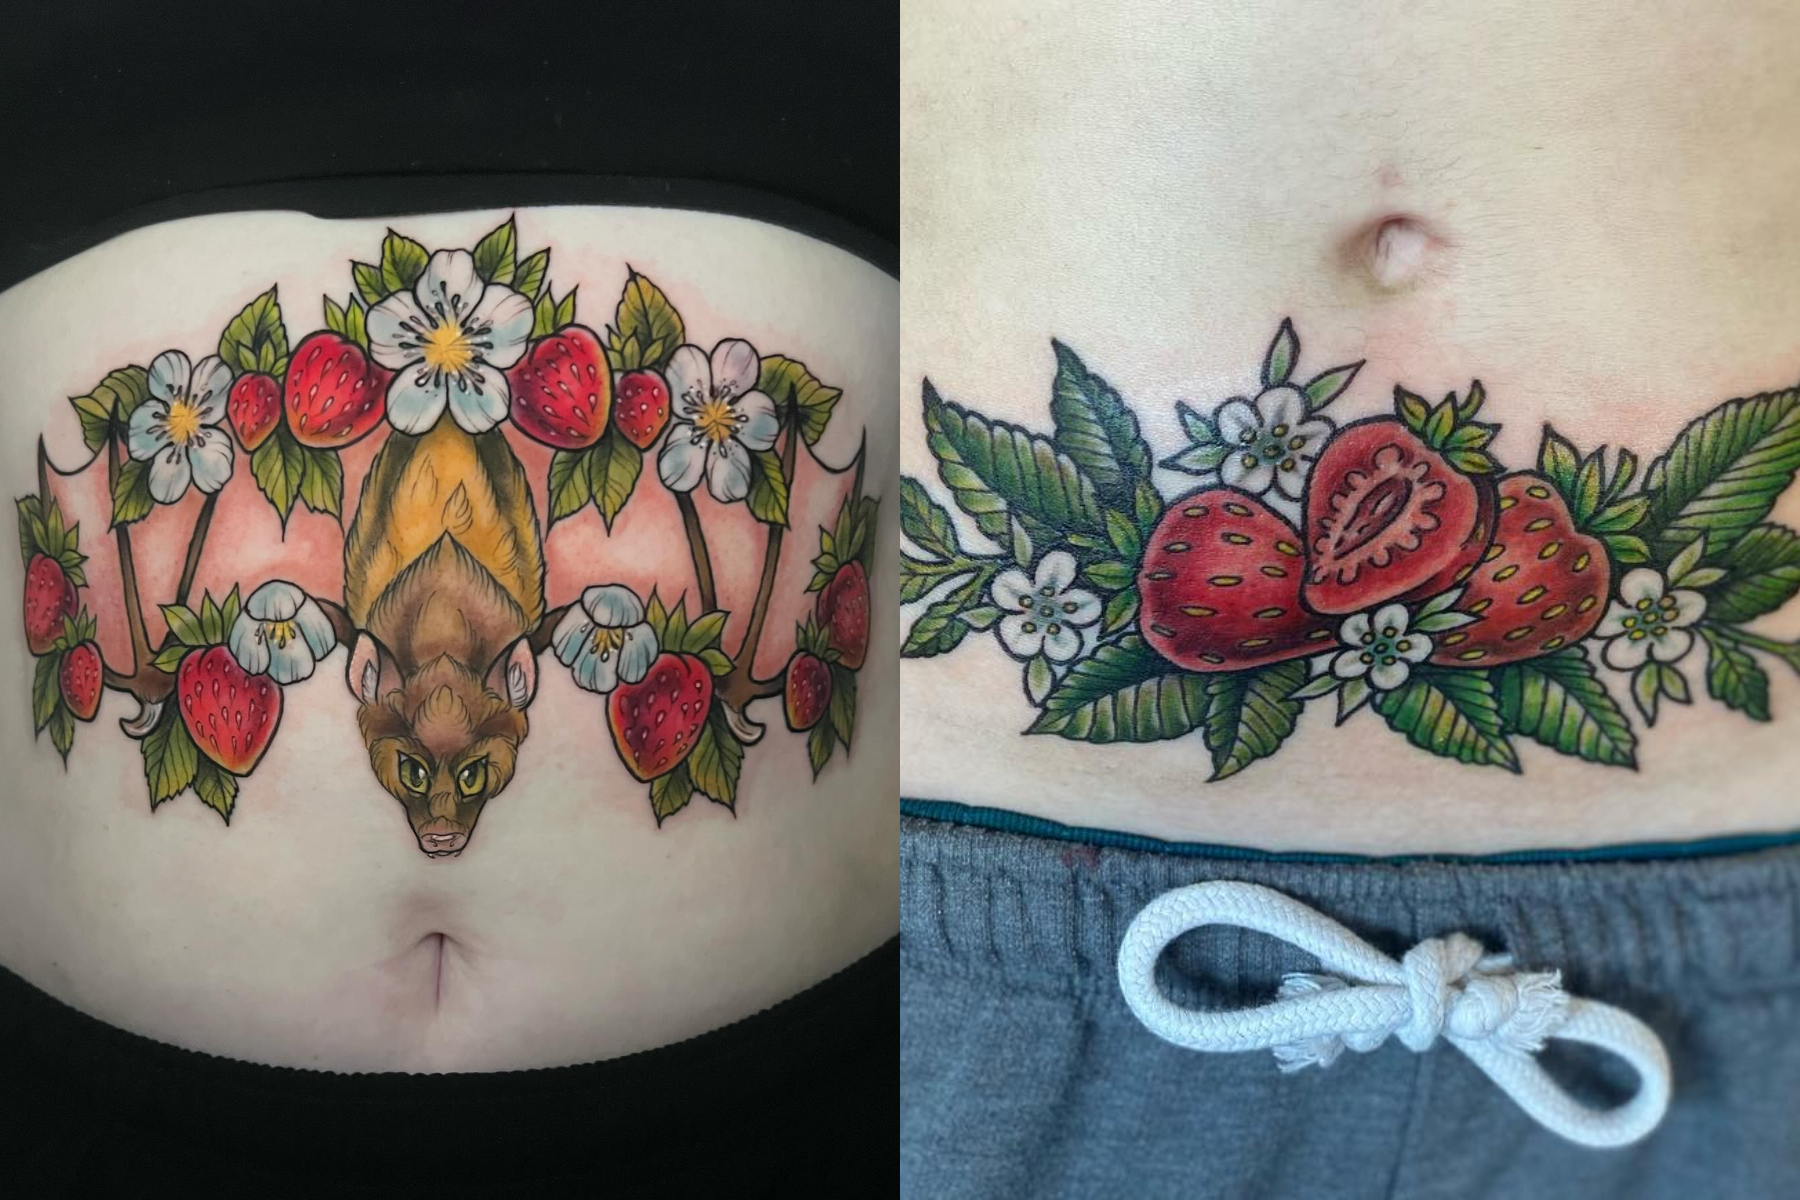 Ladies with red strawberry tattoos on tree branches